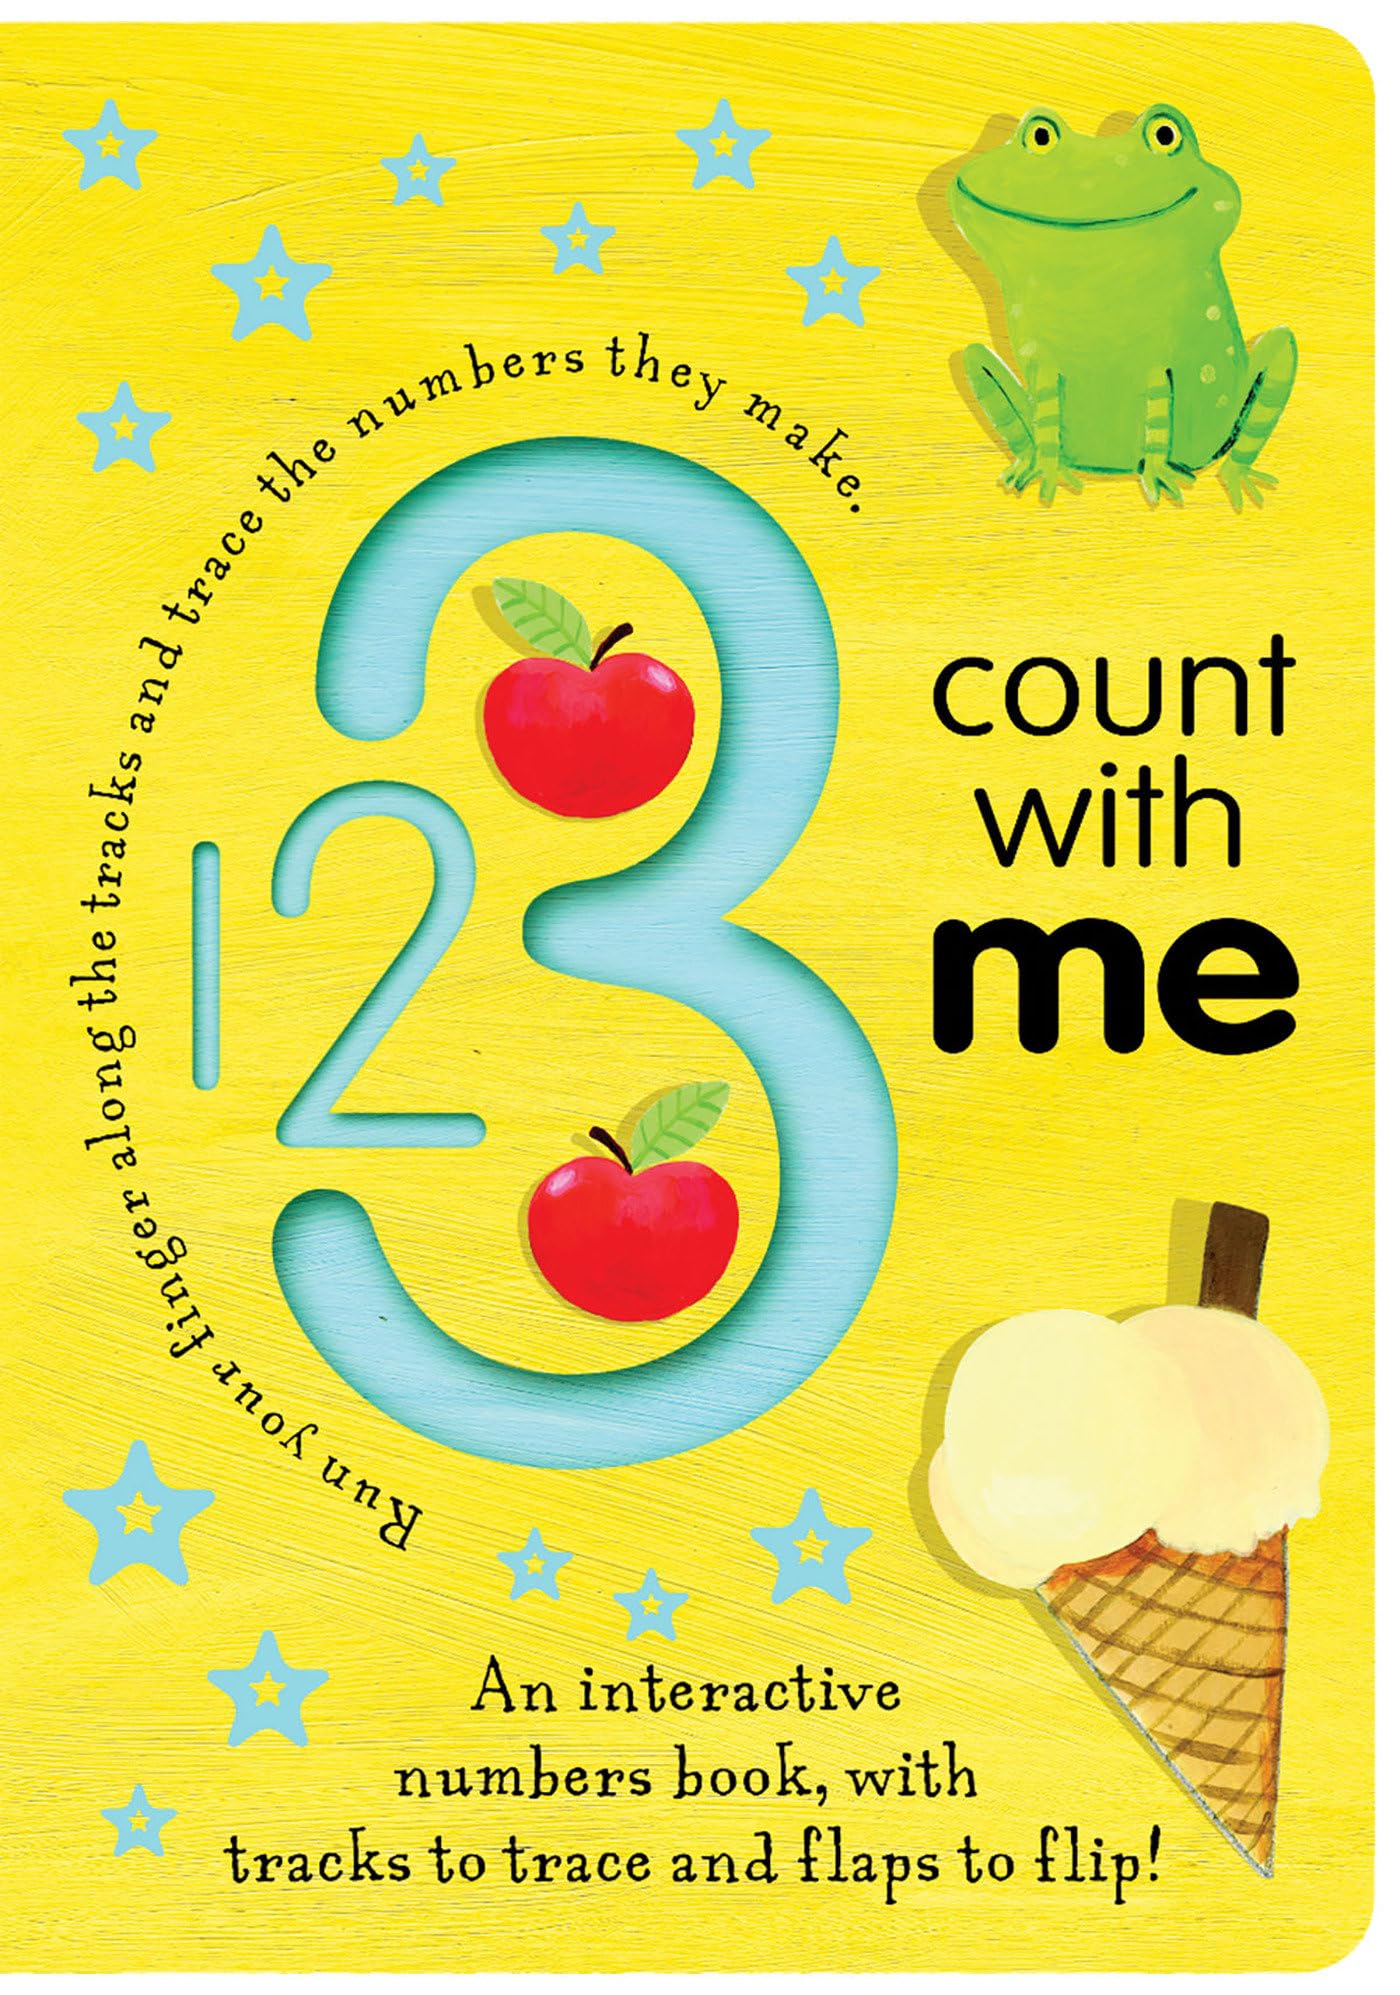 123 Count with Me by Tiger Tales